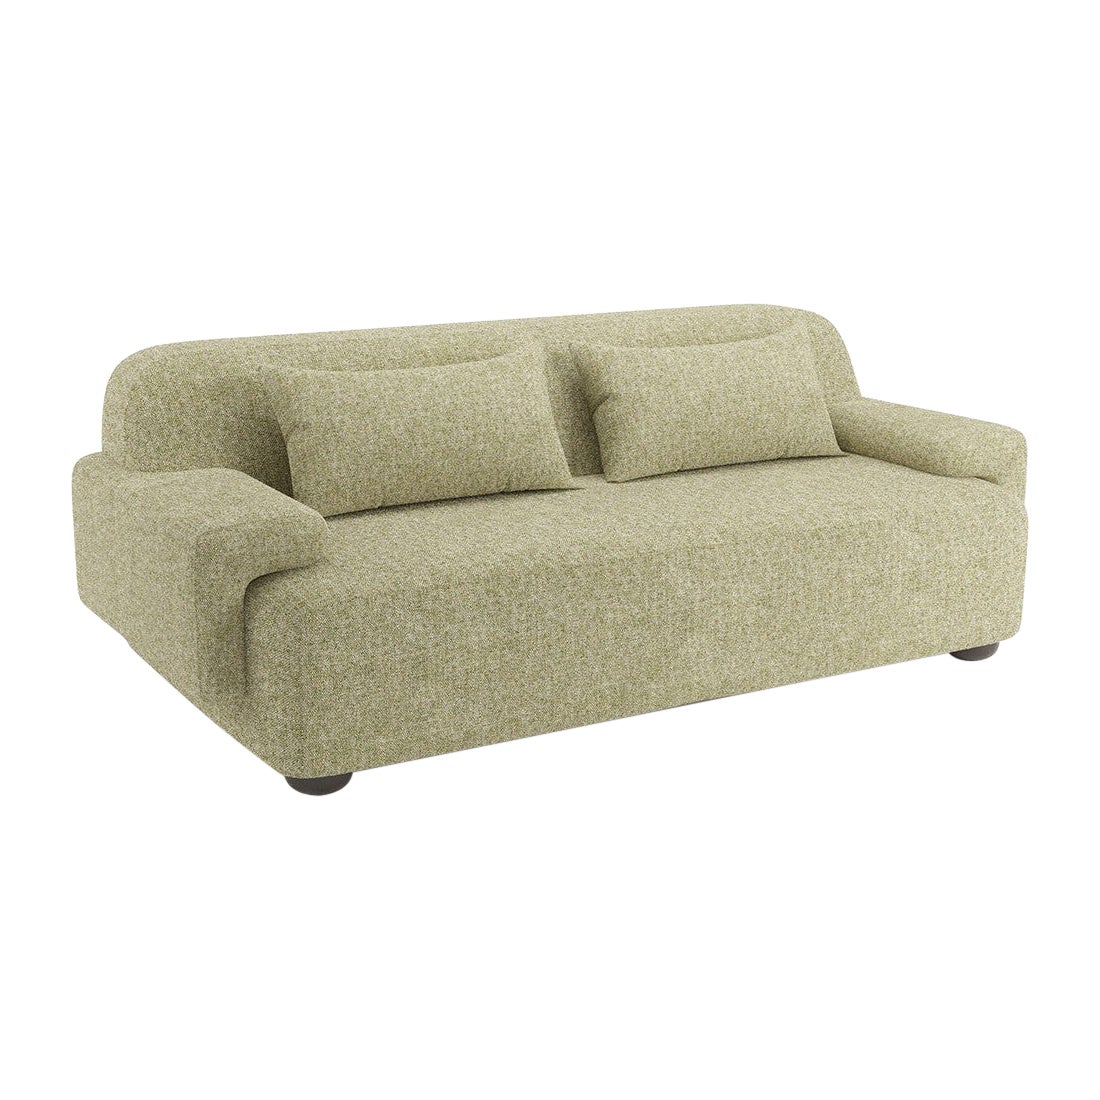 Popus Editions Lena 2.5 Seater Sofa in Cactus London Linen Fabric For Sale